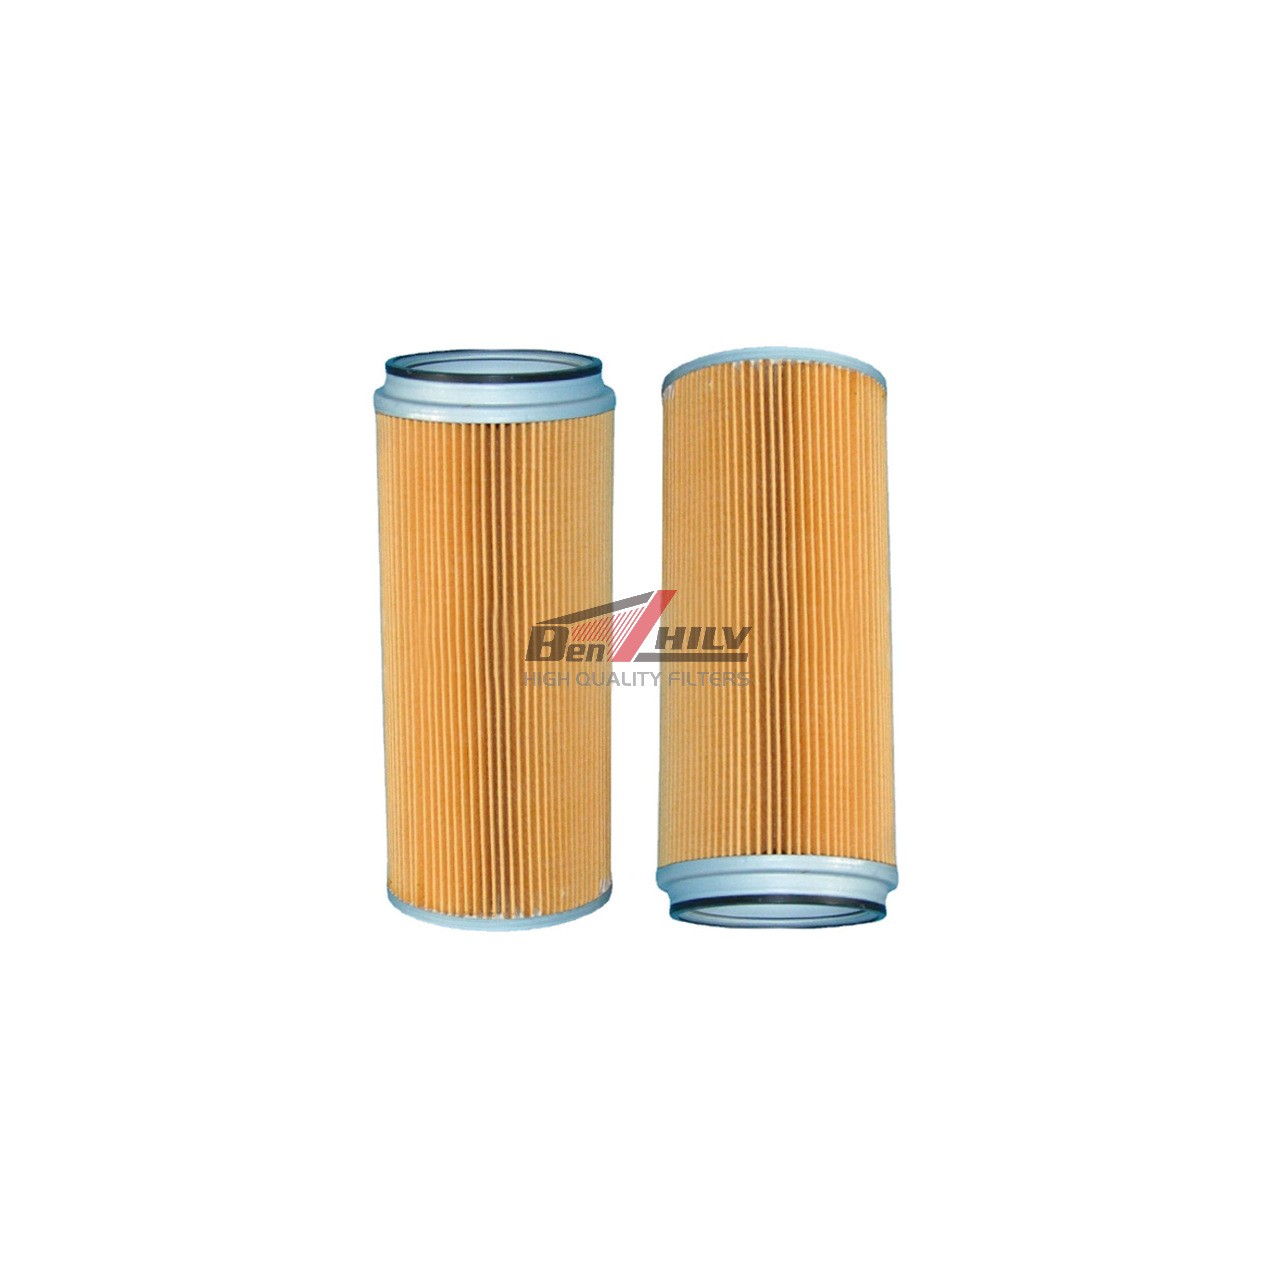 LF3422 P550019 P550059 1878100590 LUBRICATE THE OIL FILTER ELEMENT